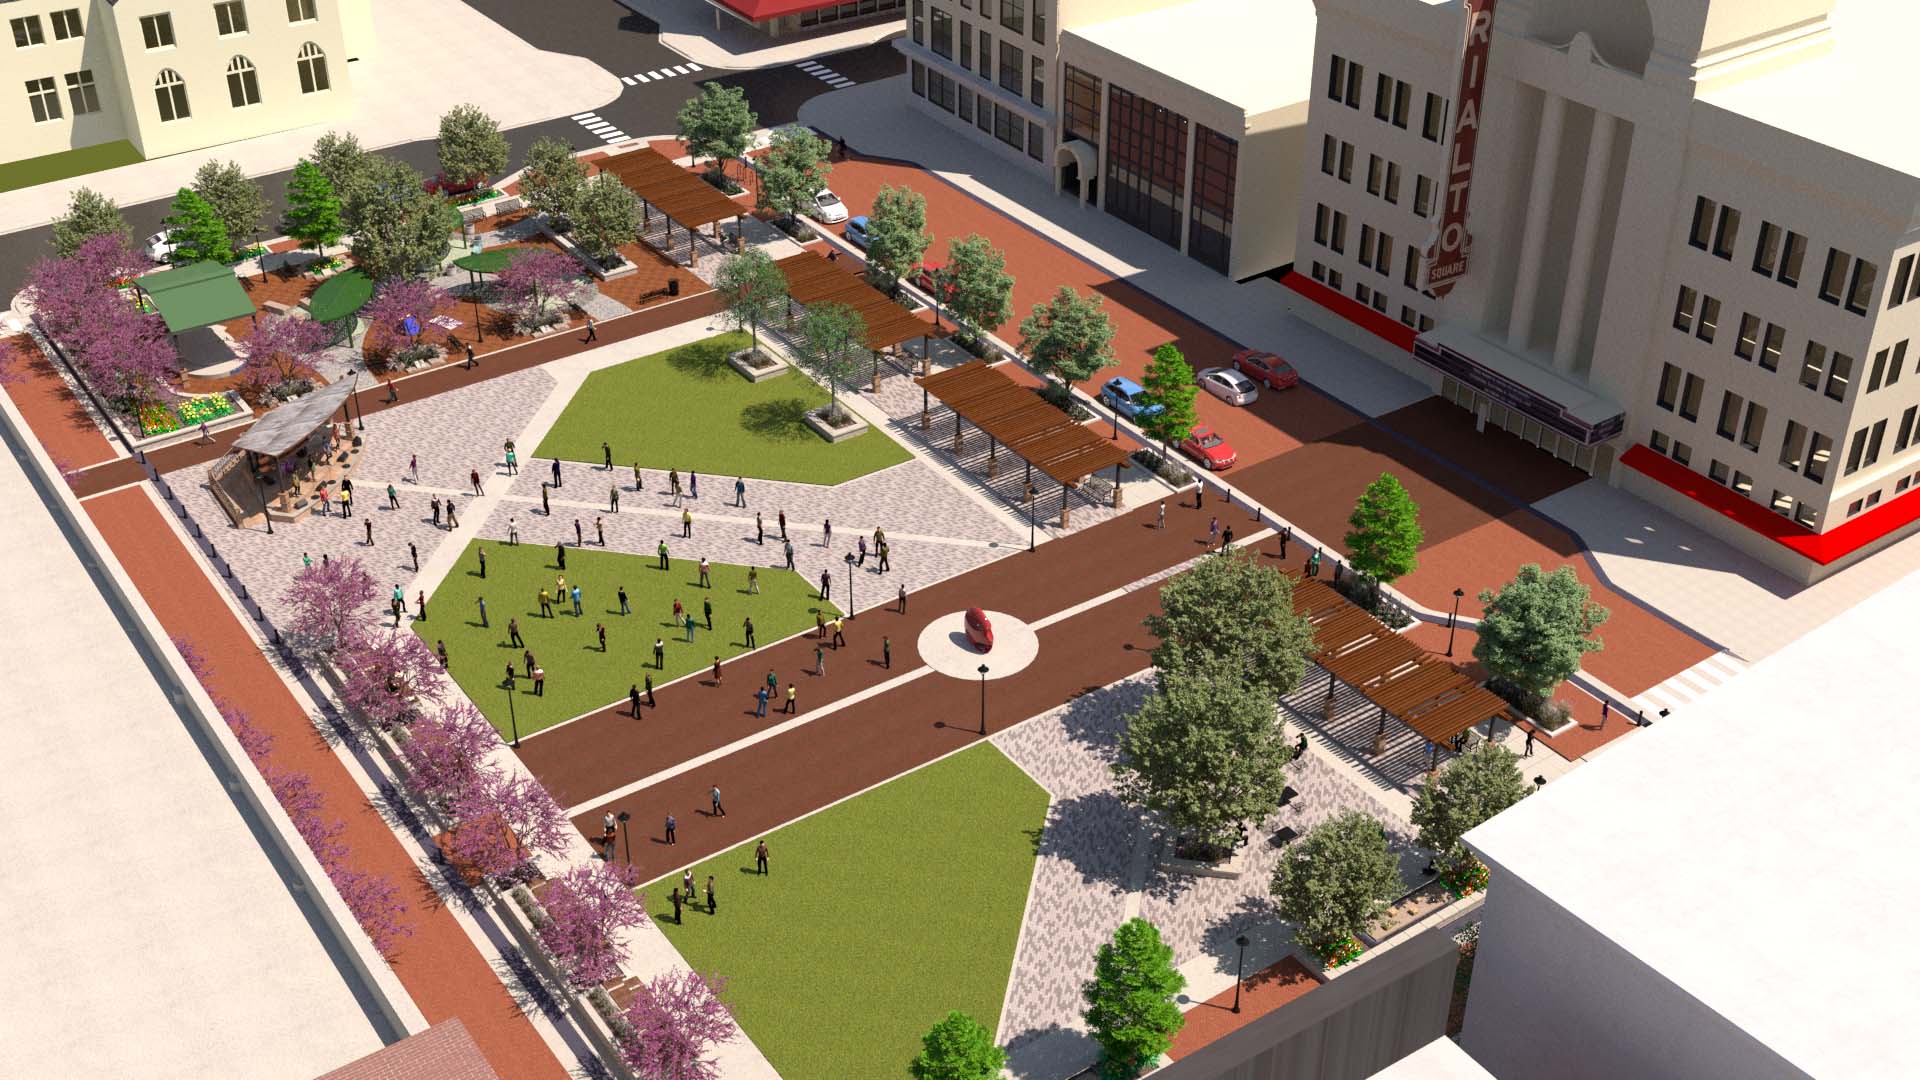 Joliet asks residents’ input on sculpture for downtown city square